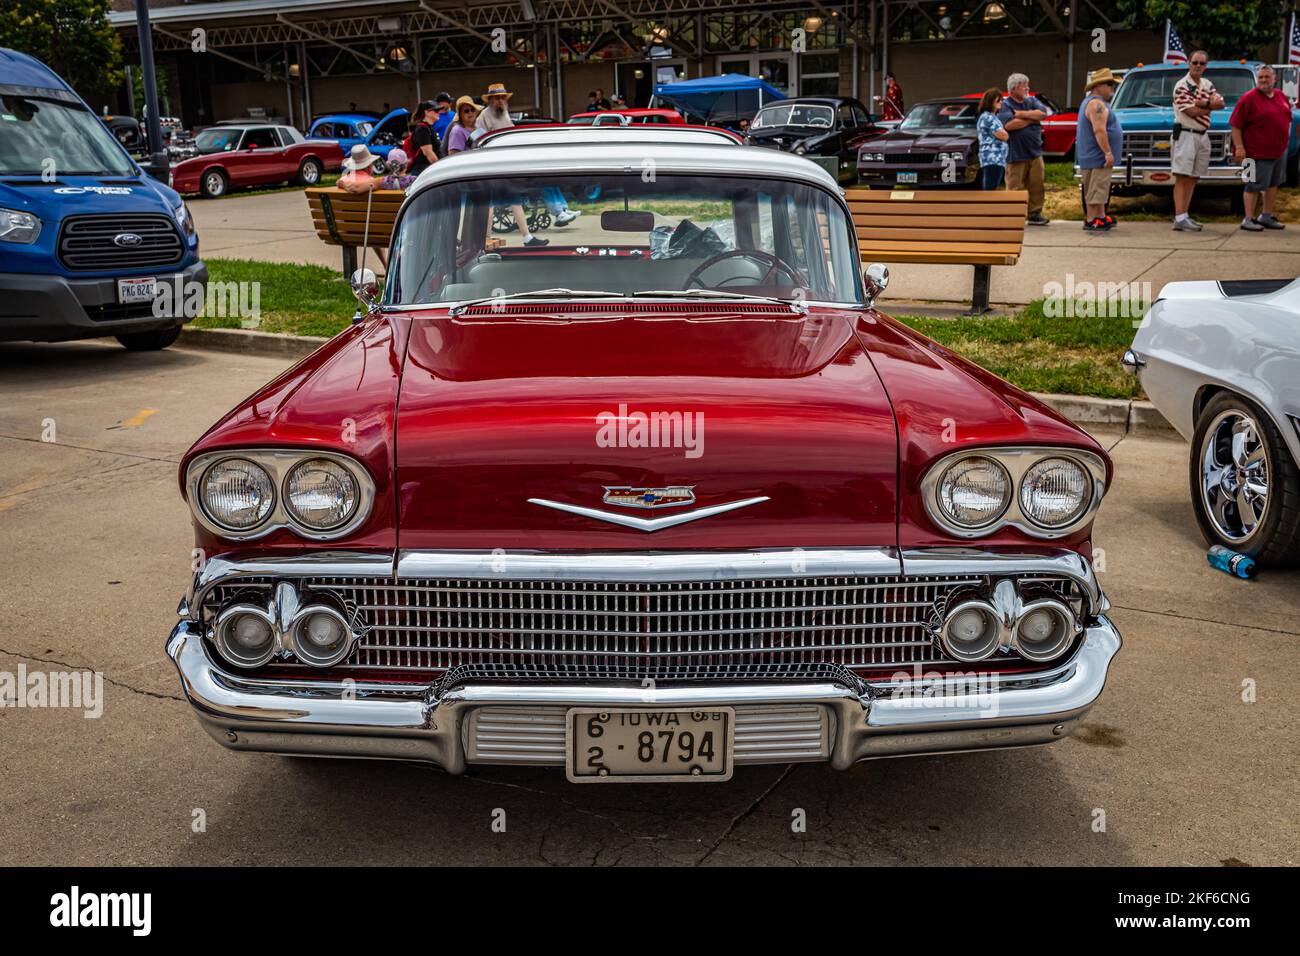 Des Moines, IA - July 02, 2022: High perspective front view of a 1958 Chevrolet Brookwood Station Wagon at a local car show. Stock Photo